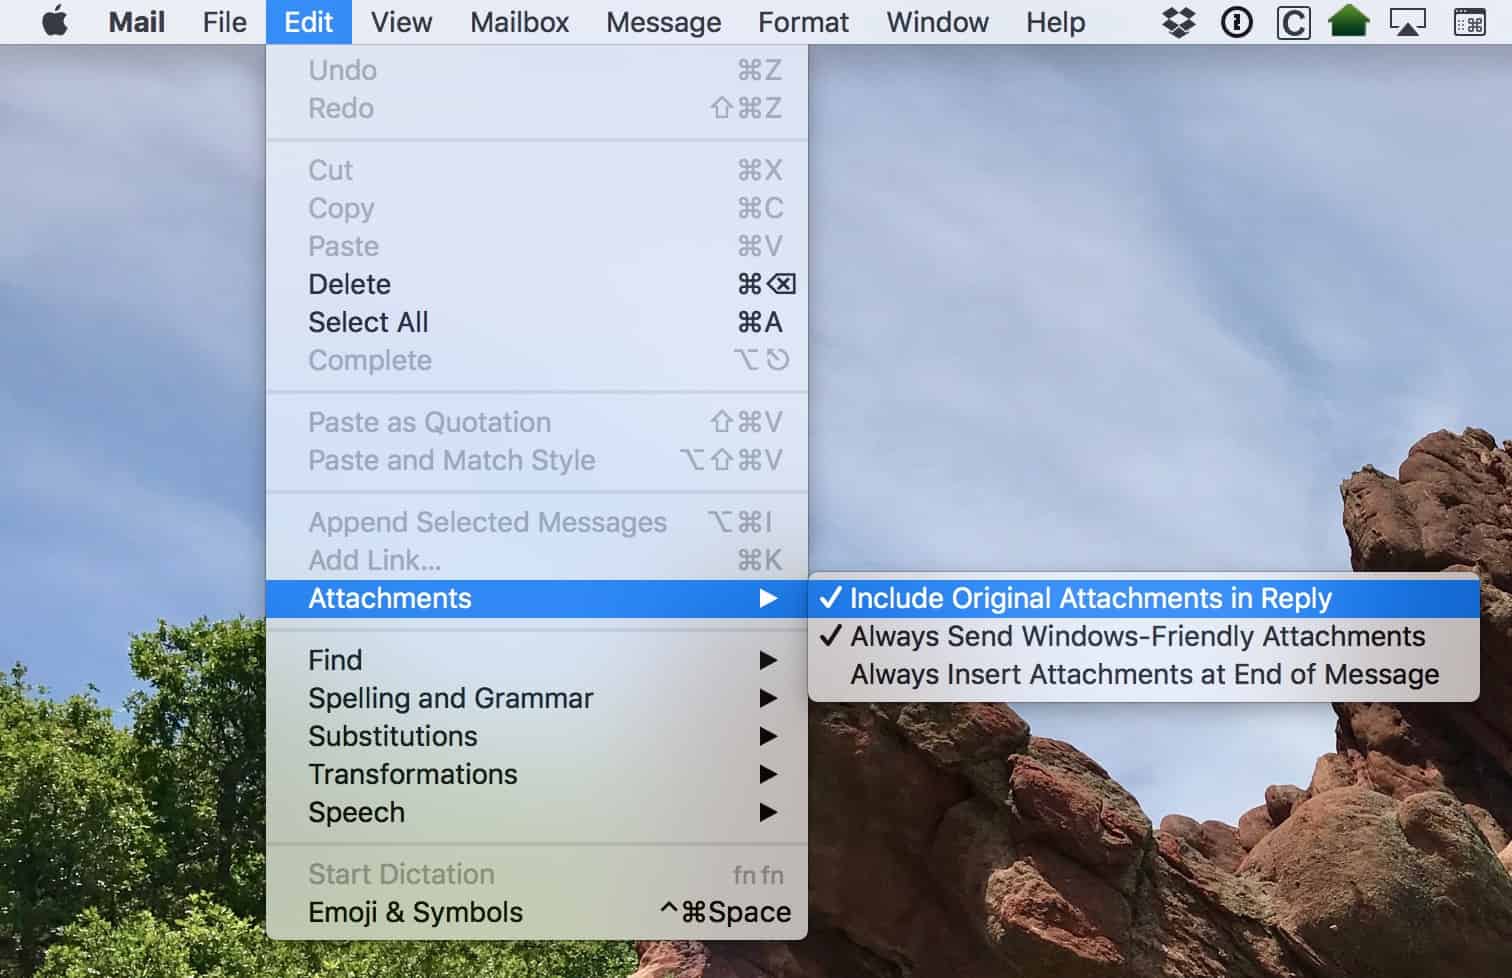 The Mail Edit Menu lets you include attachments in replies as a default